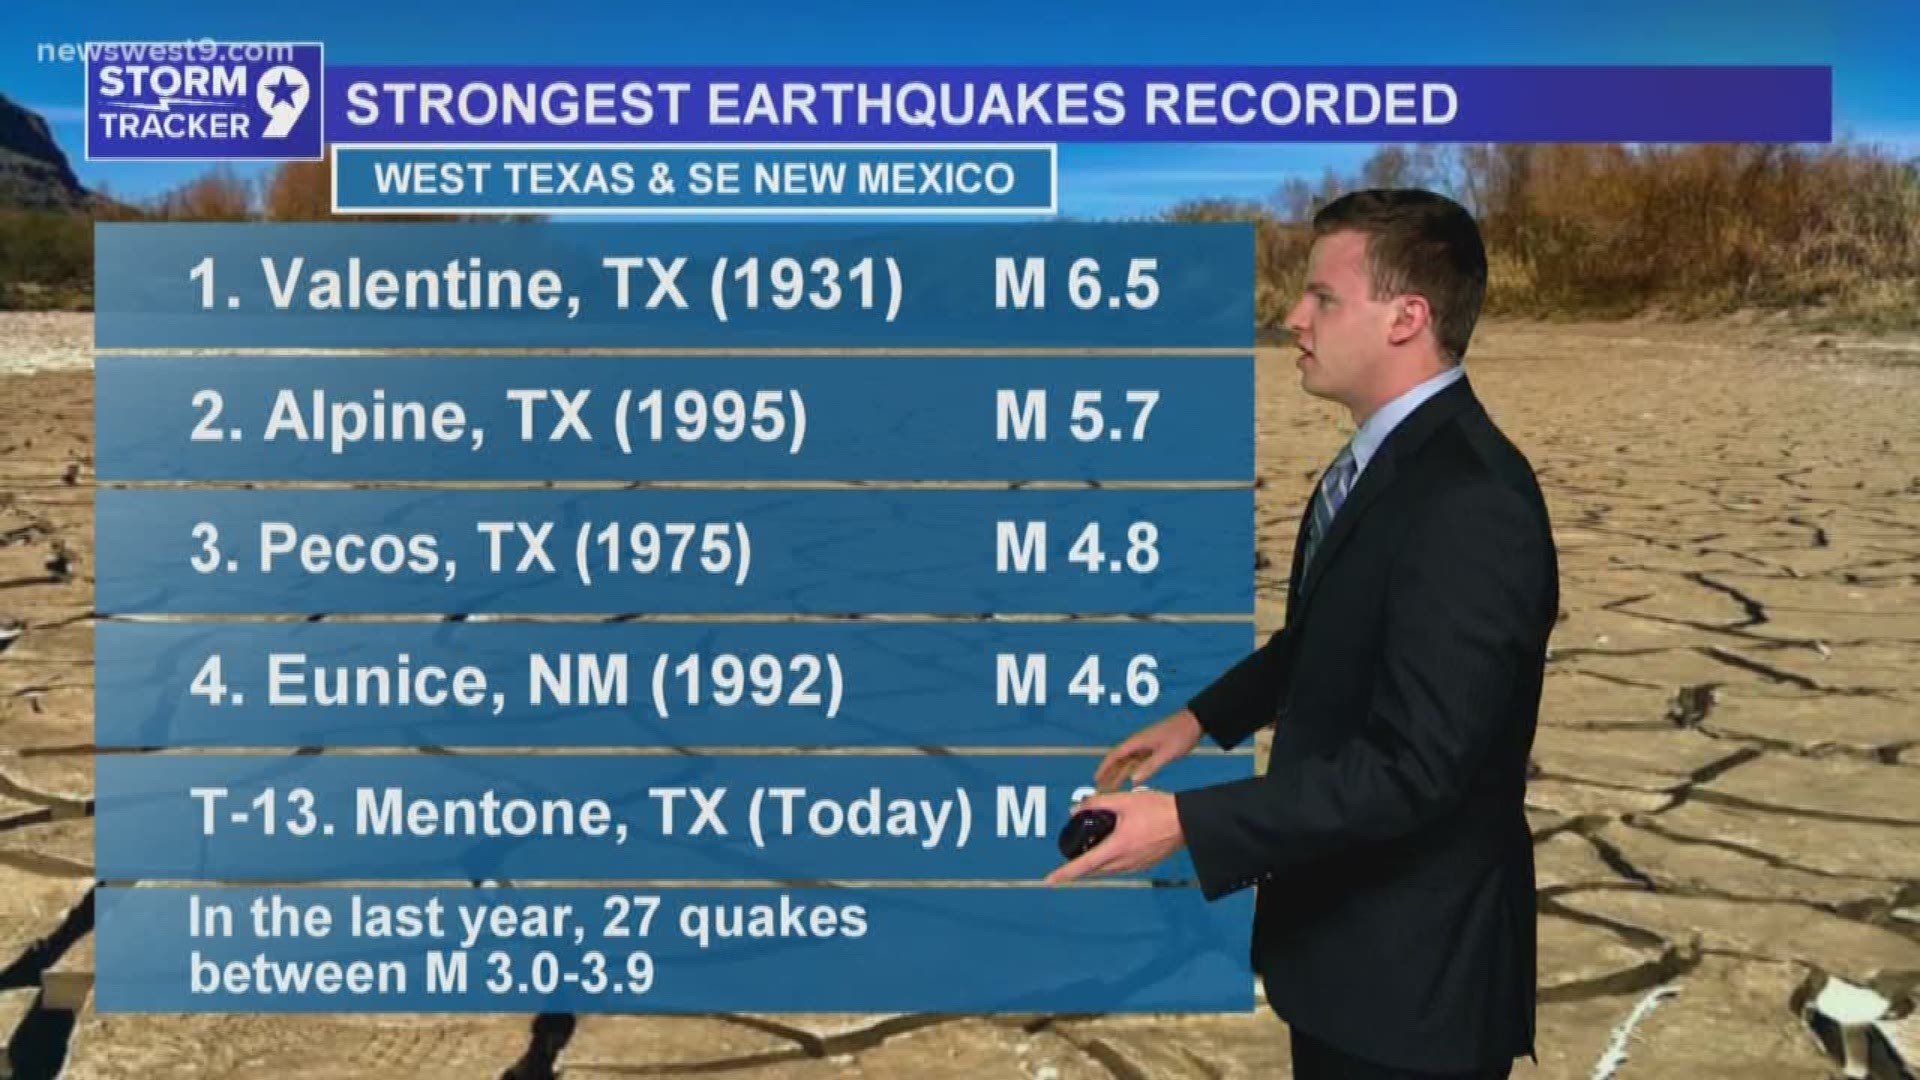 West Texas was shaken by two earthquakes, one about 23 miles from Mentone and the other about 45 miles away.